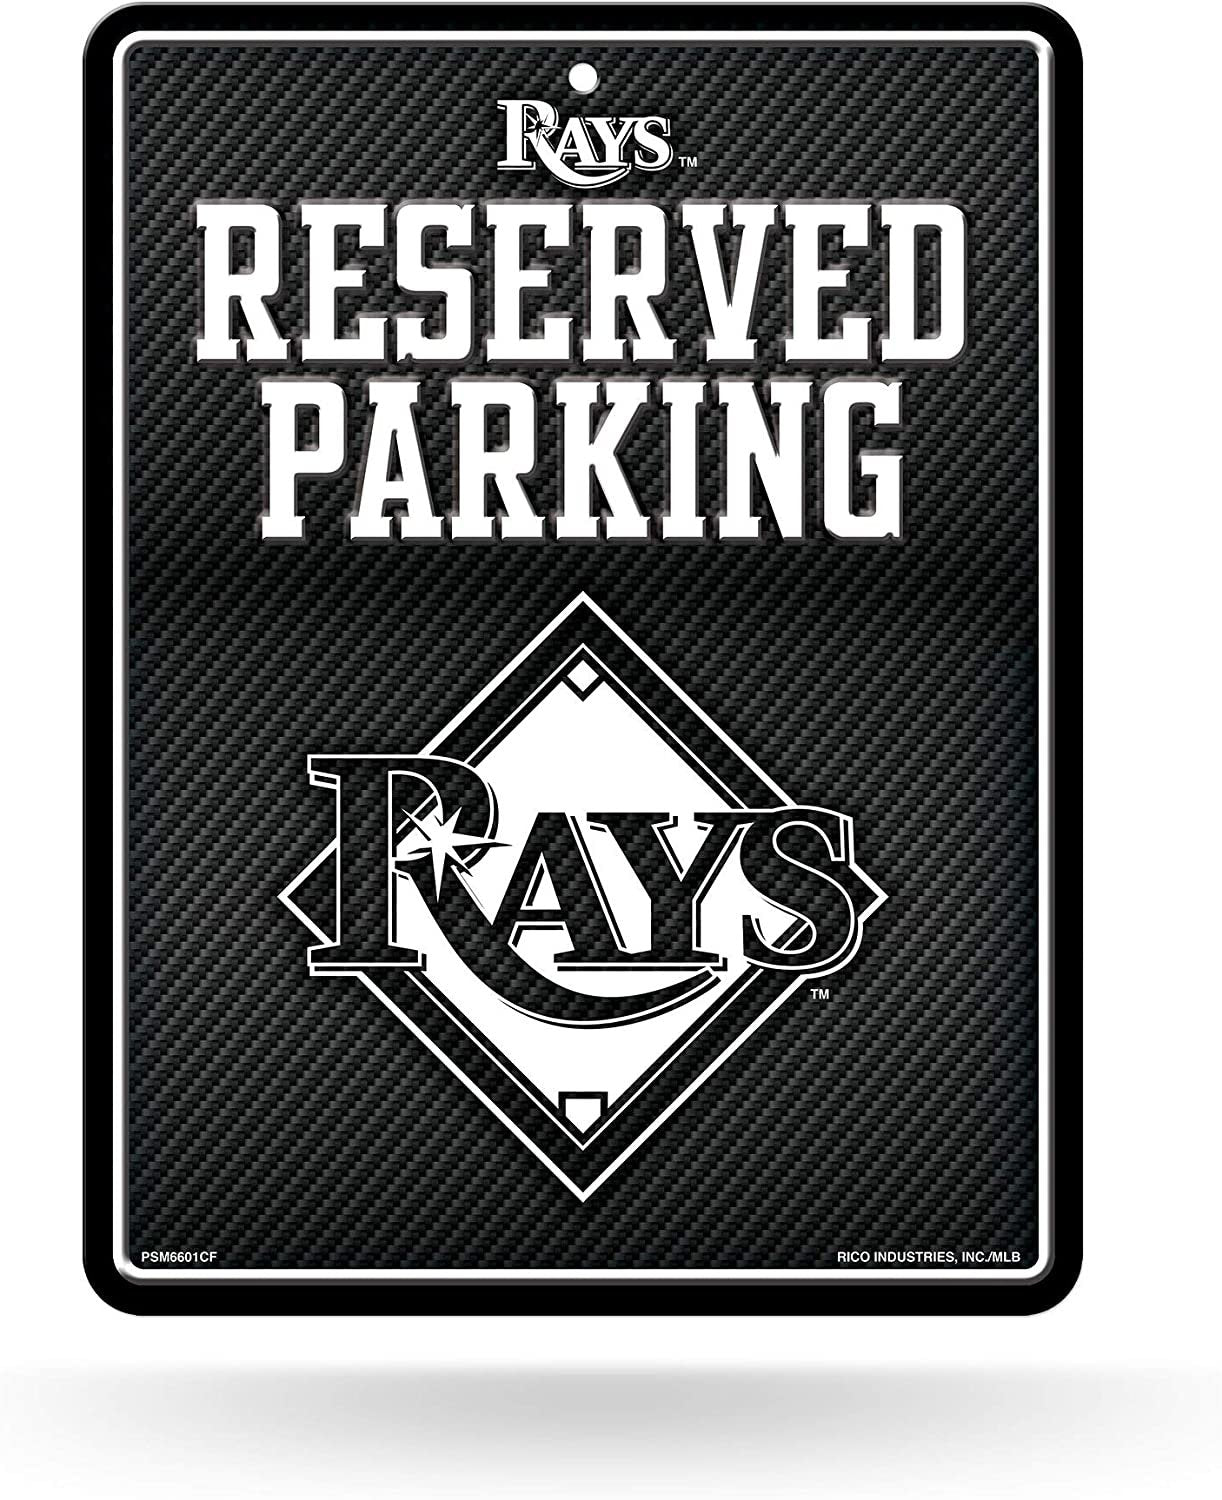 Tampa Bay Rays Metal Parking Novelty Wall Sign 8.5 x 11 Inch Carbon Fiber Design